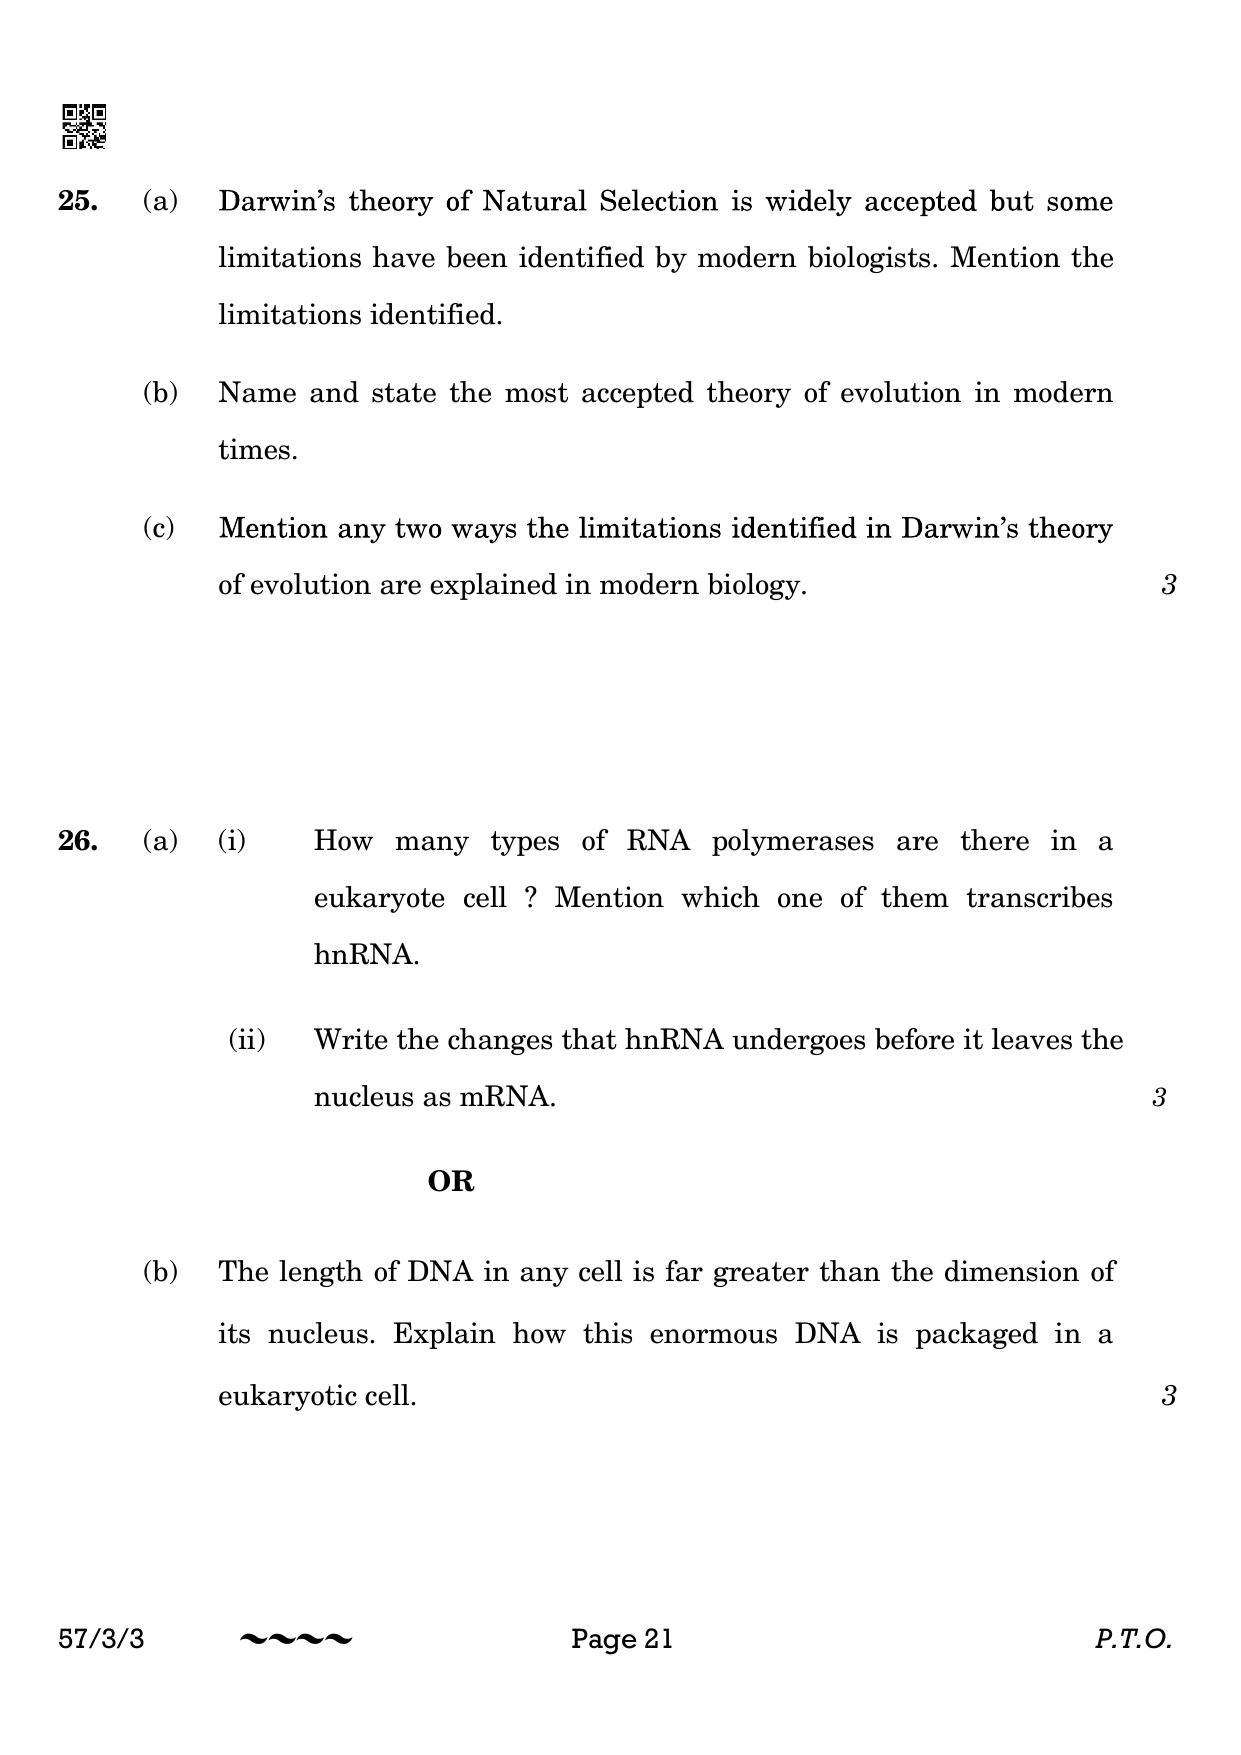 CBSE Class 12 57-3-3 Biology 2023 Question Paper - Page 21